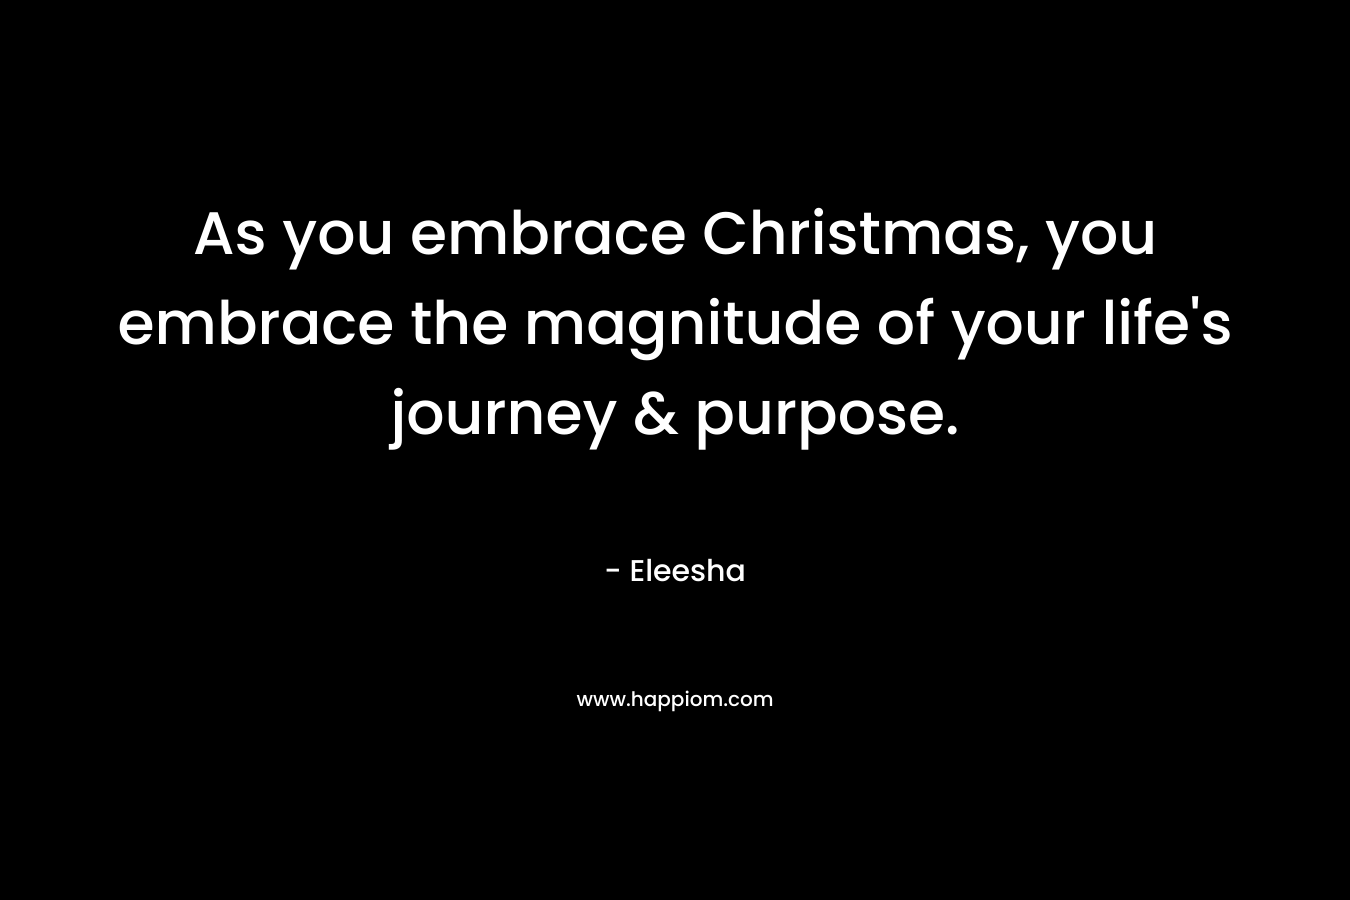 As you embrace Christmas, you embrace the magnitude of your life’s journey & purpose. – Eleesha